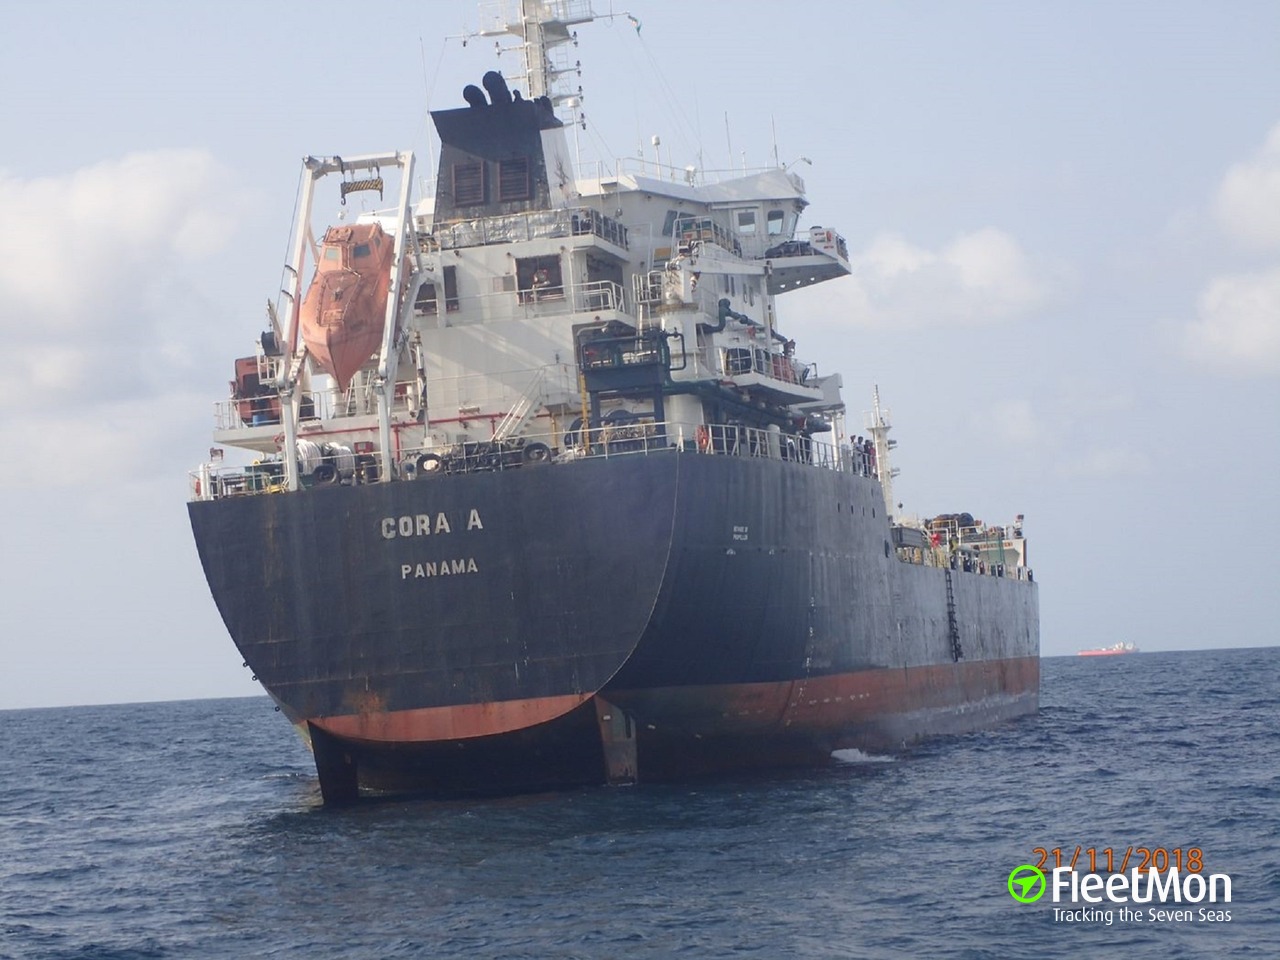 African Pearl ran aground in Congo river, third vessel since last year